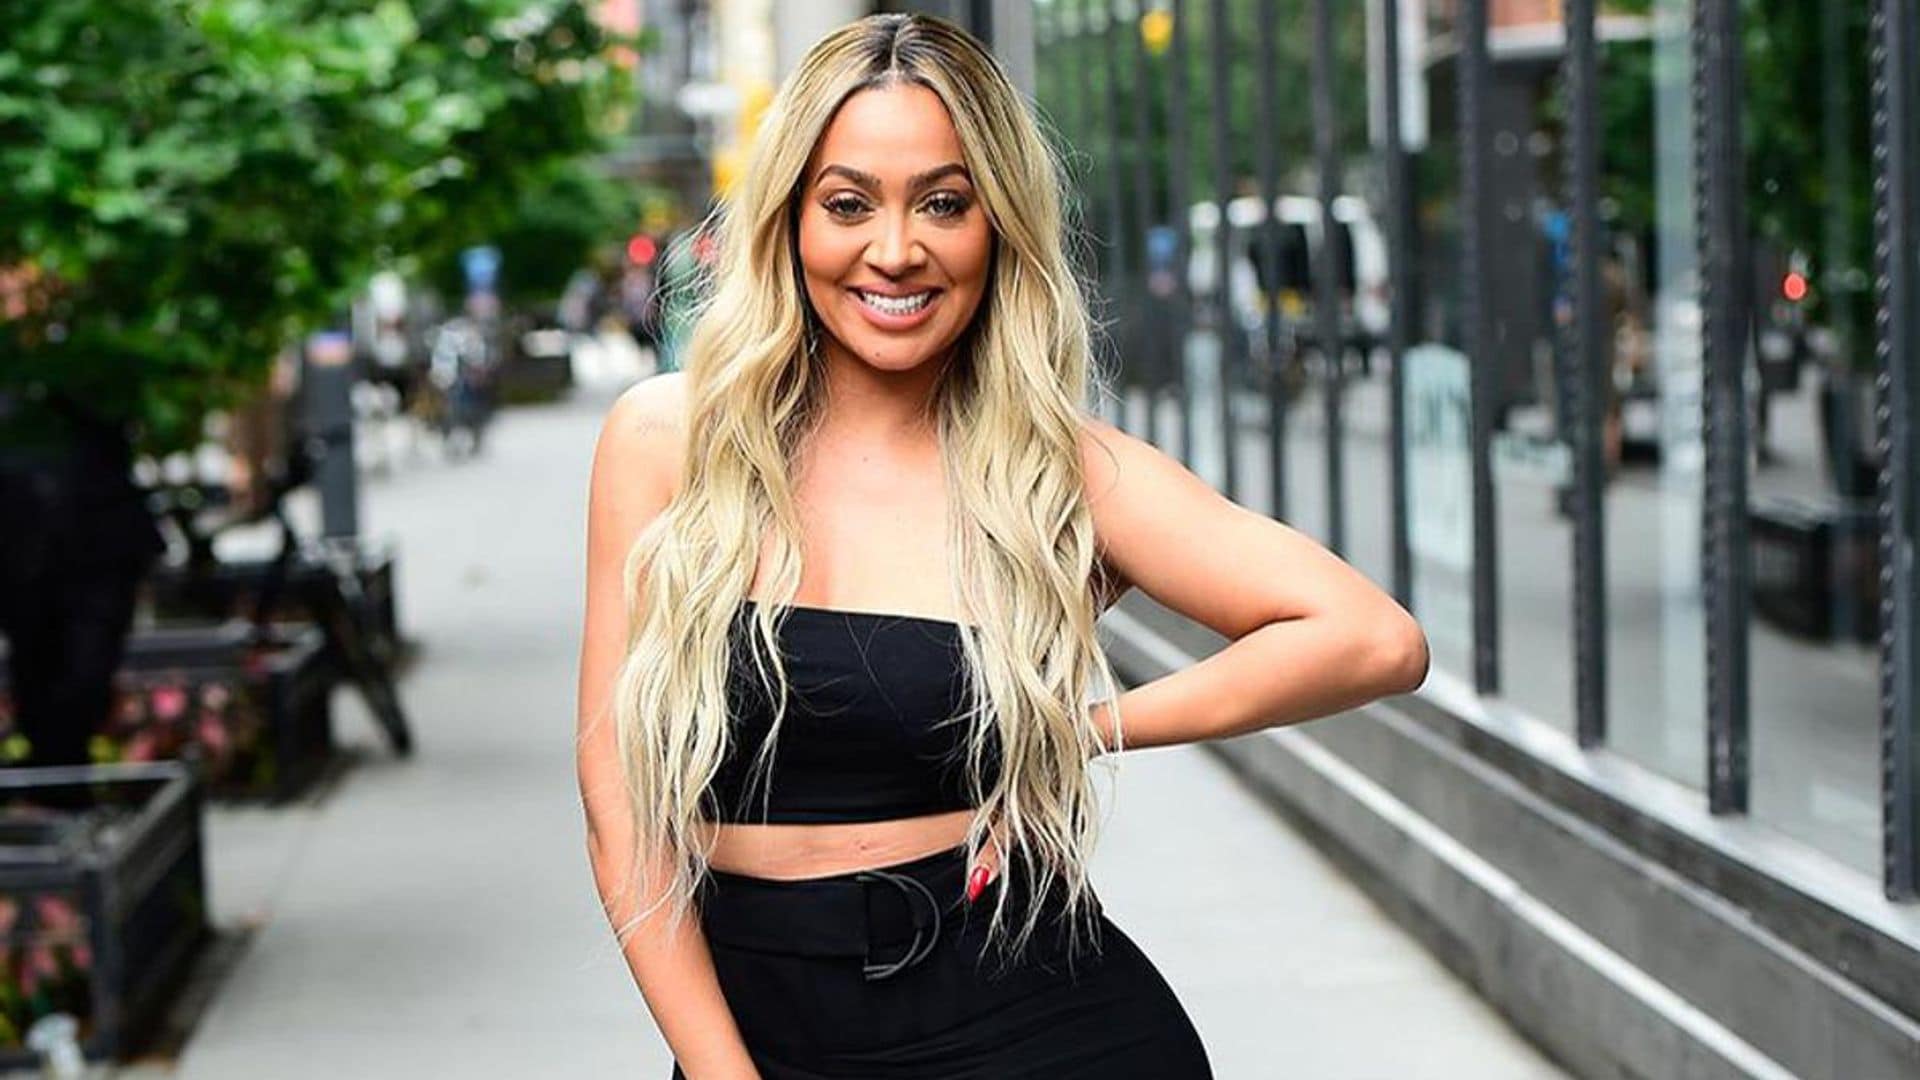 La La Anthony wants you to help level the playing field for women in sports during March Madness